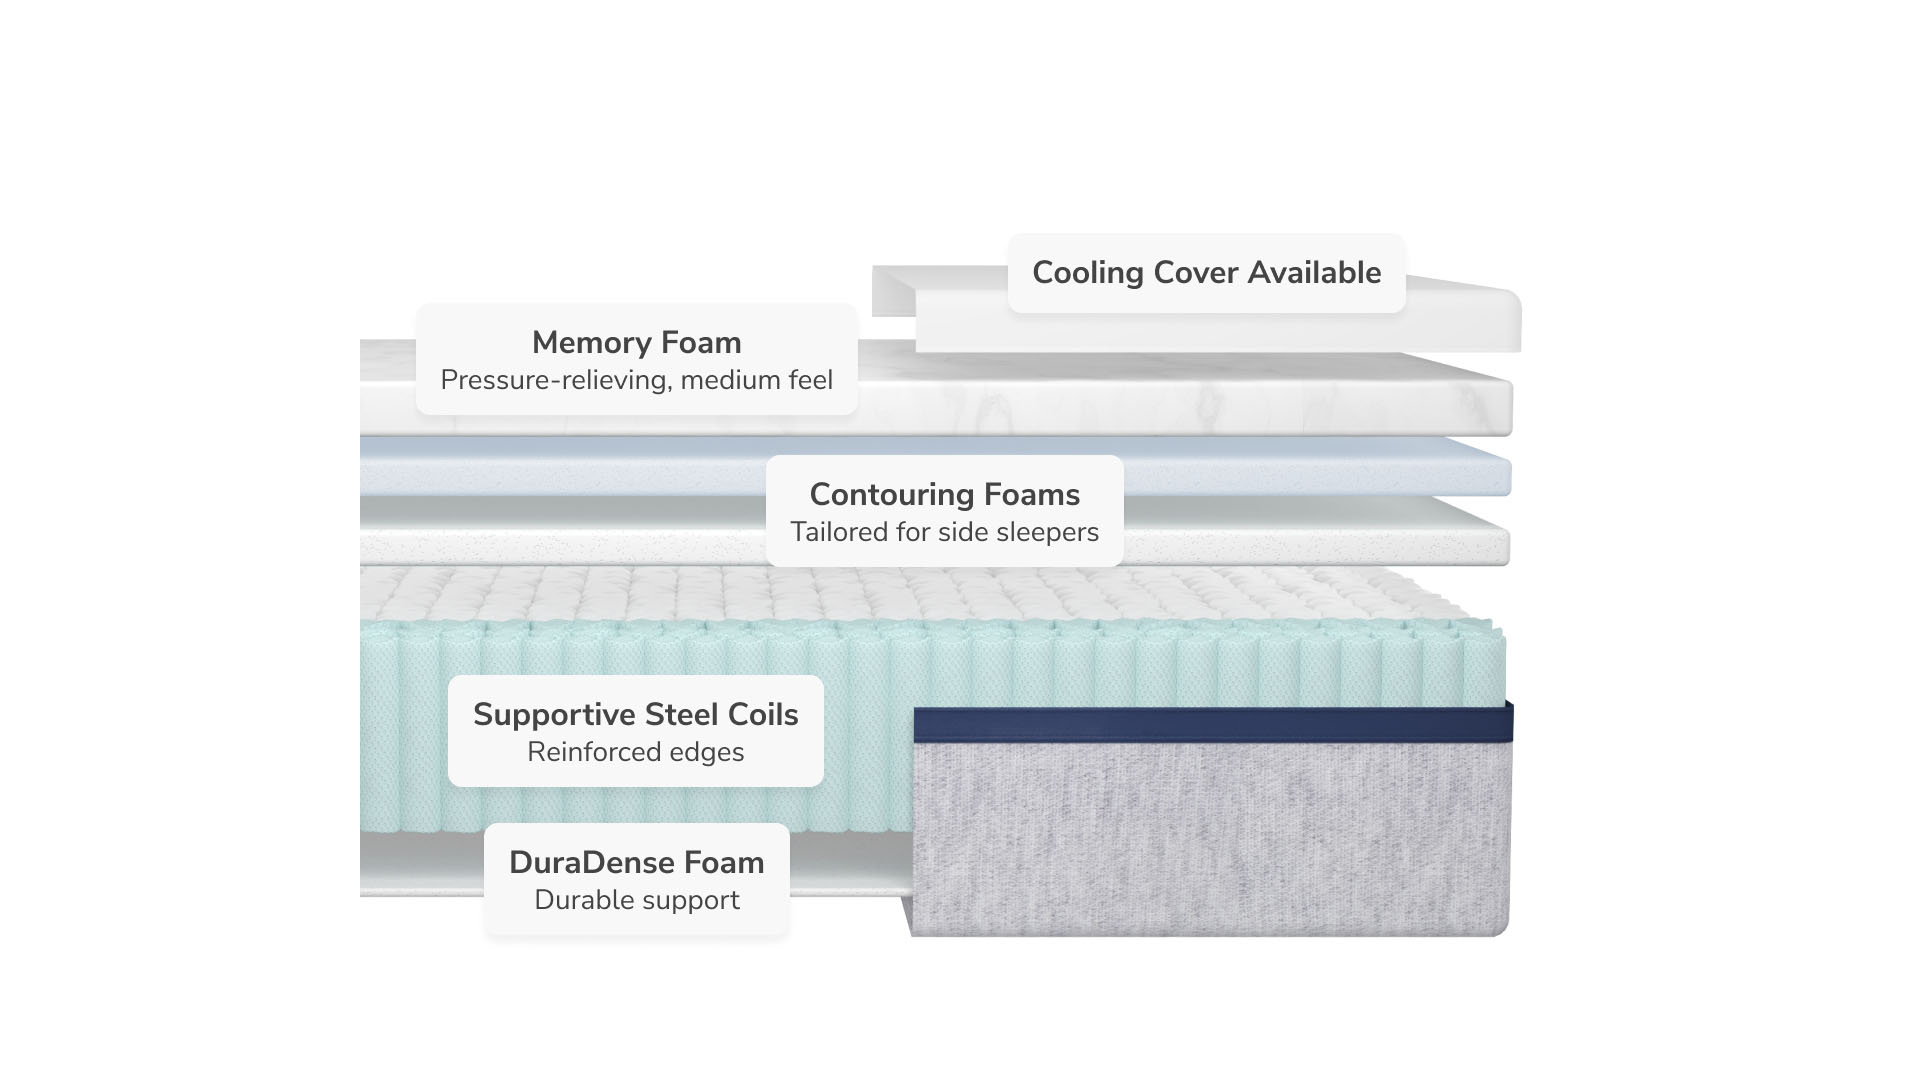 An exploded chart showing the layers of the Helix Midnight mattress